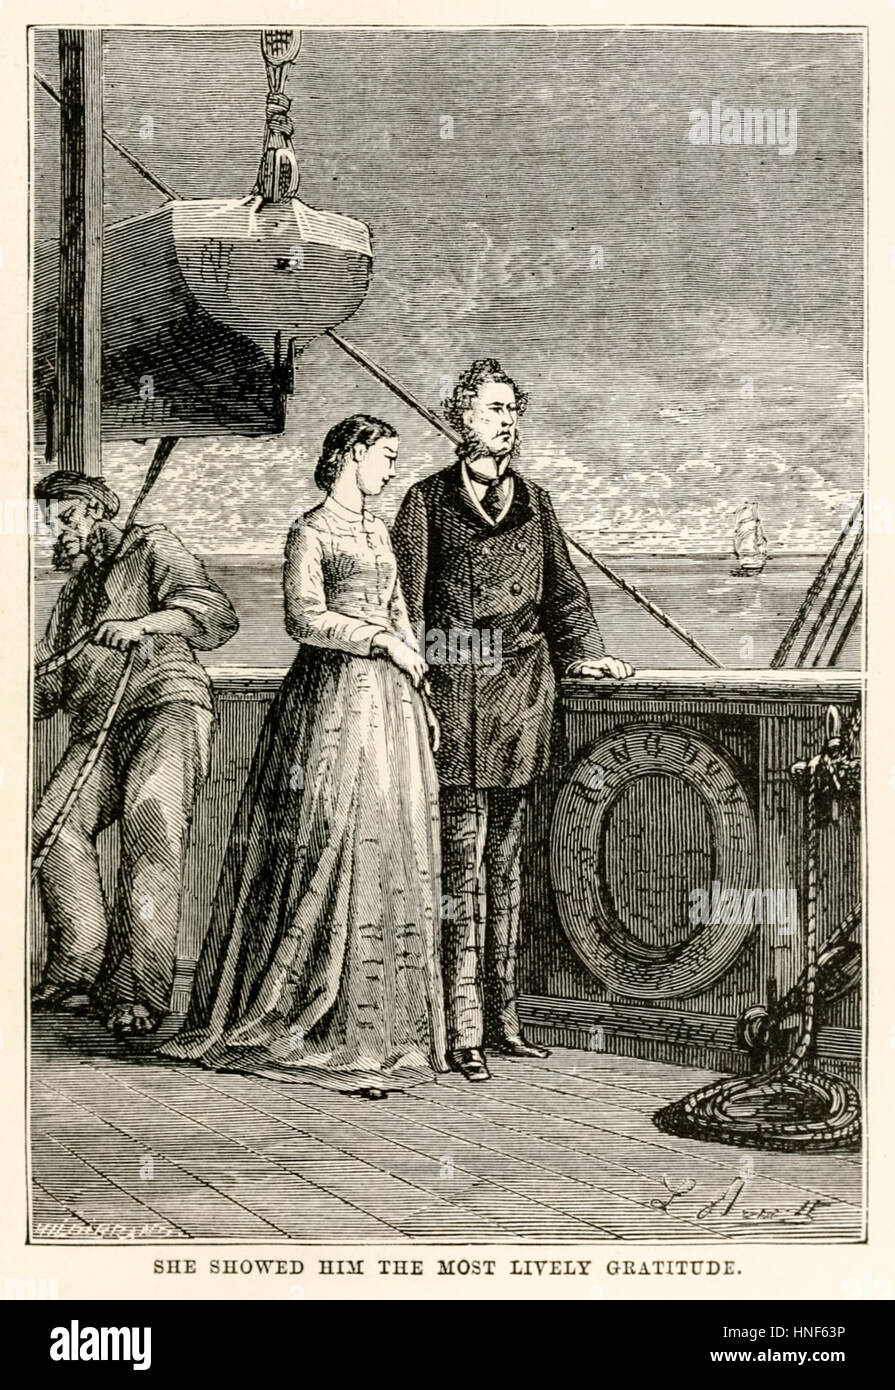 “She showed him the most lively gratitude.” from ‘Around the World in Eighty Days’ by Jules Verne (1828-1905) published in 1873 with illustration by Léon Benett (1839-1917) and engraving by Henri-Théophile Hildebrand (1824-1897). Stock Photo